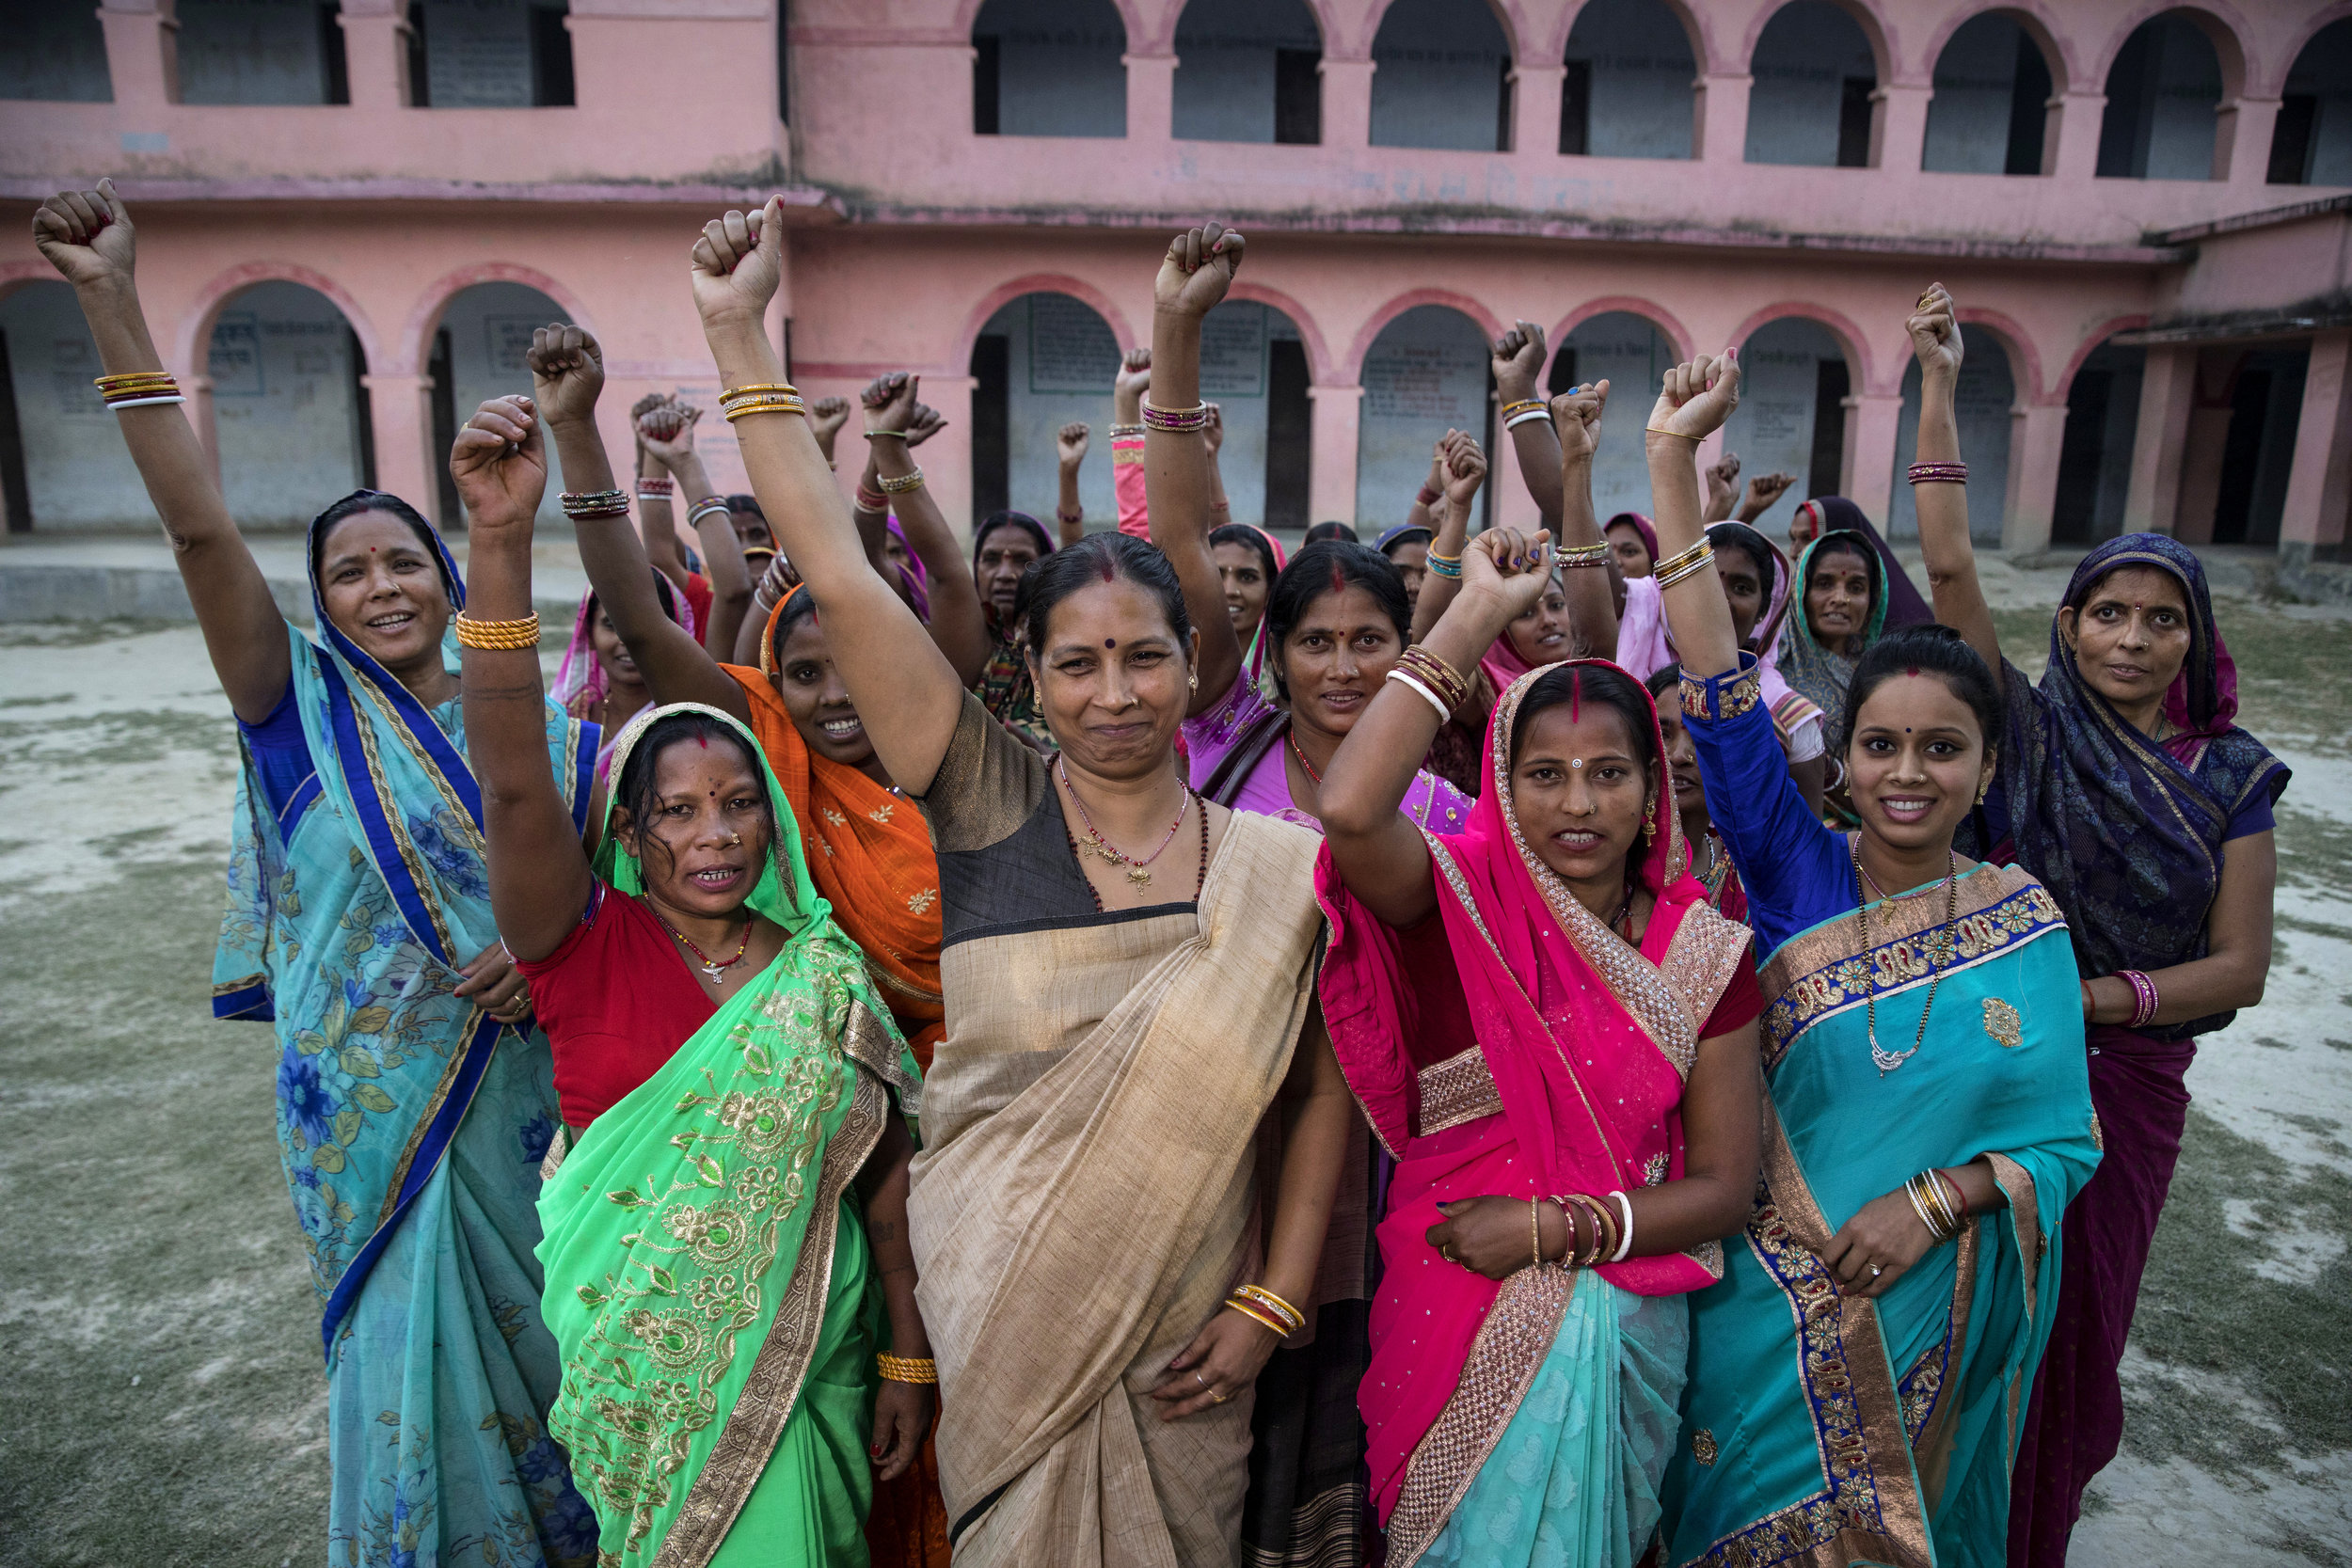 Empowered women wearing saris with arms upraised.